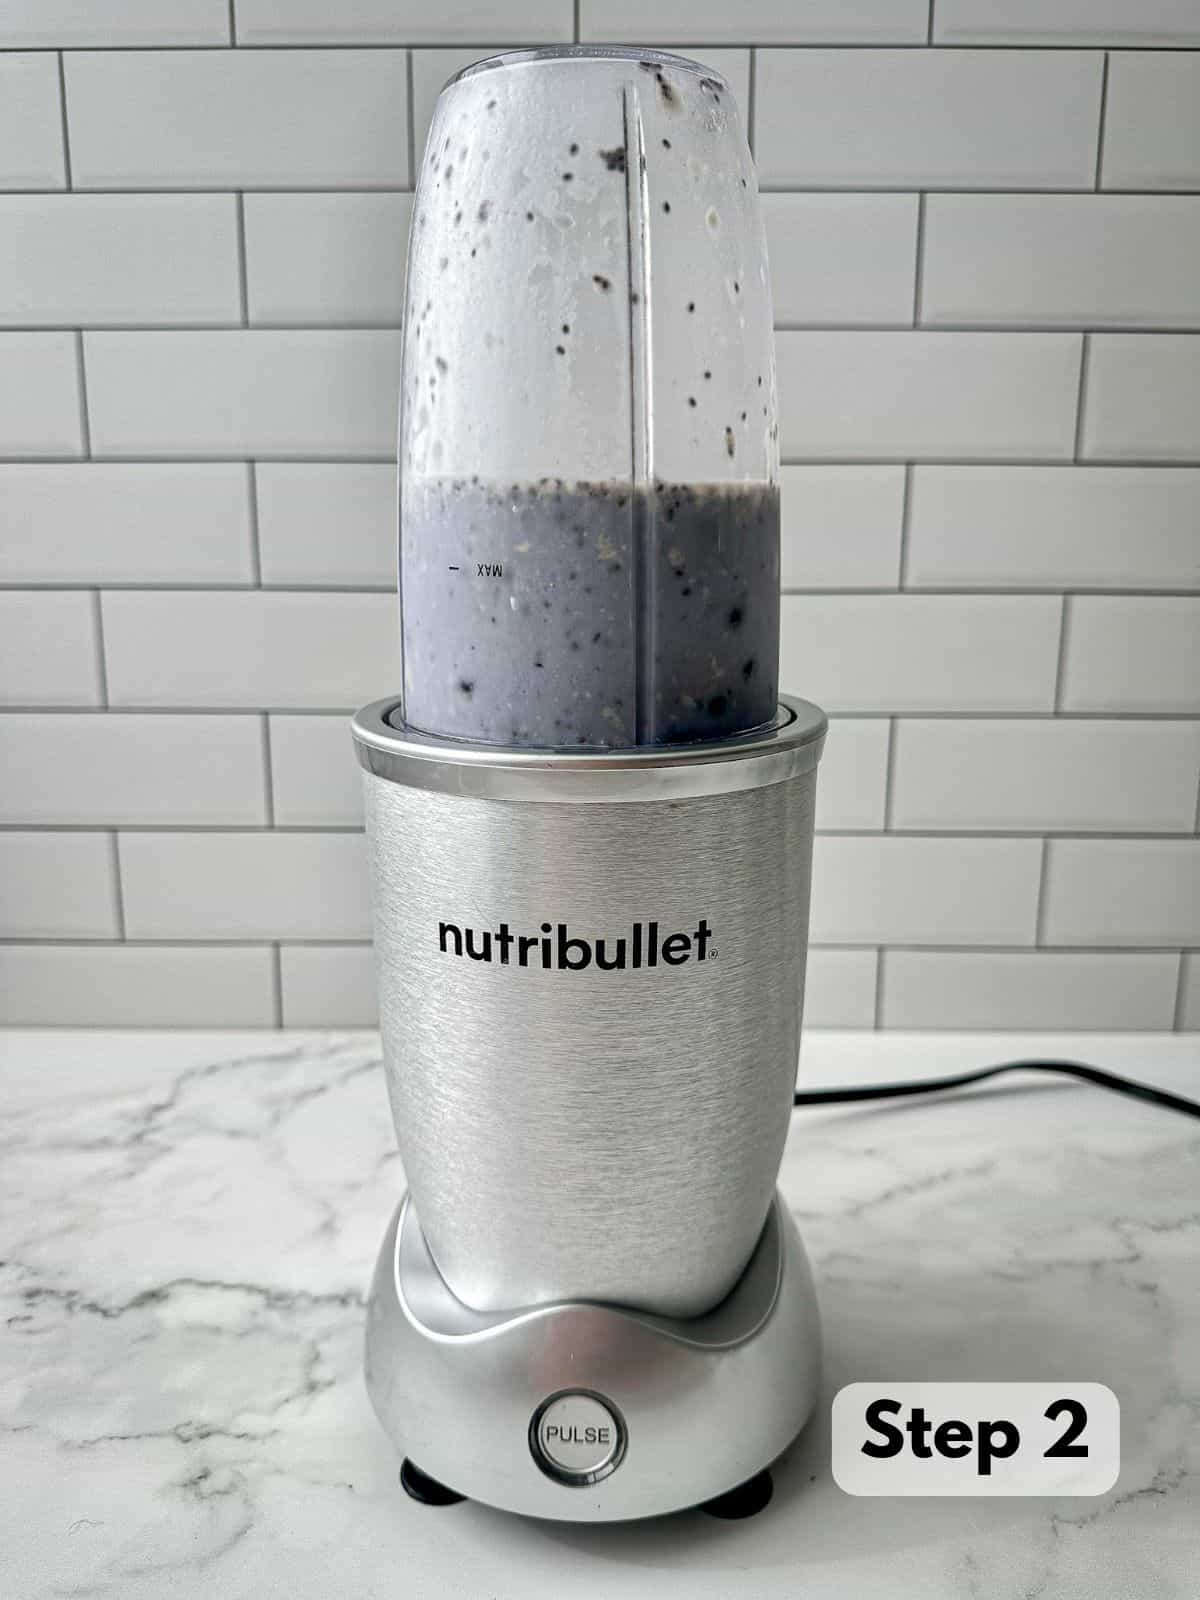 A blue liquid with blueberries, almond milk, chia seeds, and Brazil nuts in a Nutribullet blender.